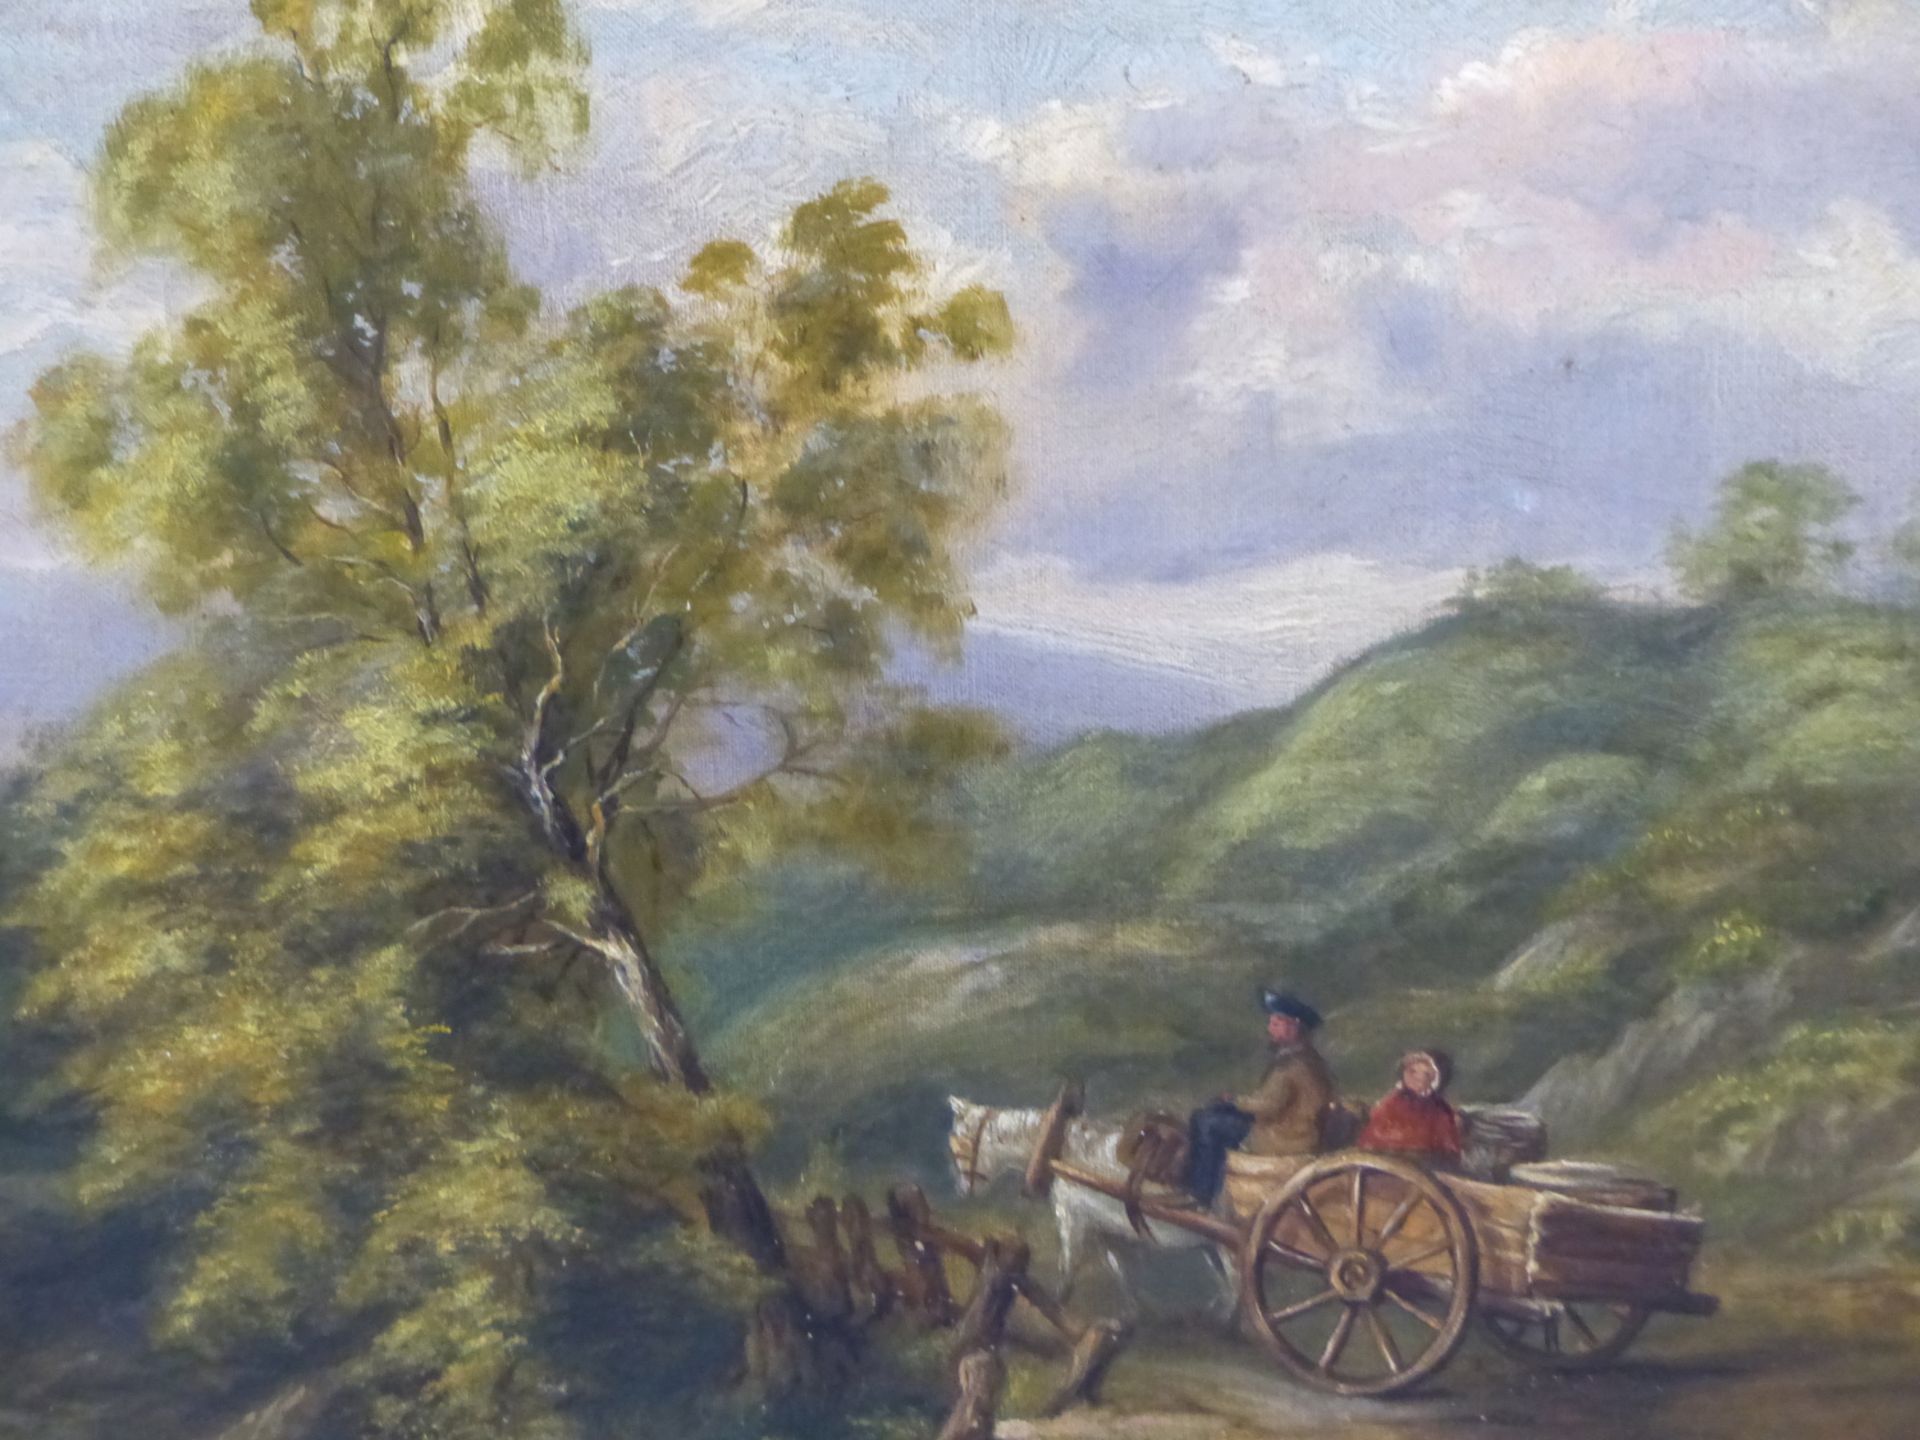 19TH CENTURY, ENGLISH SCHOOL. HORSE AND CART WITHIN RUGGED LANDSCAPE, OIL ON CANVAS.39 X 35 cm.